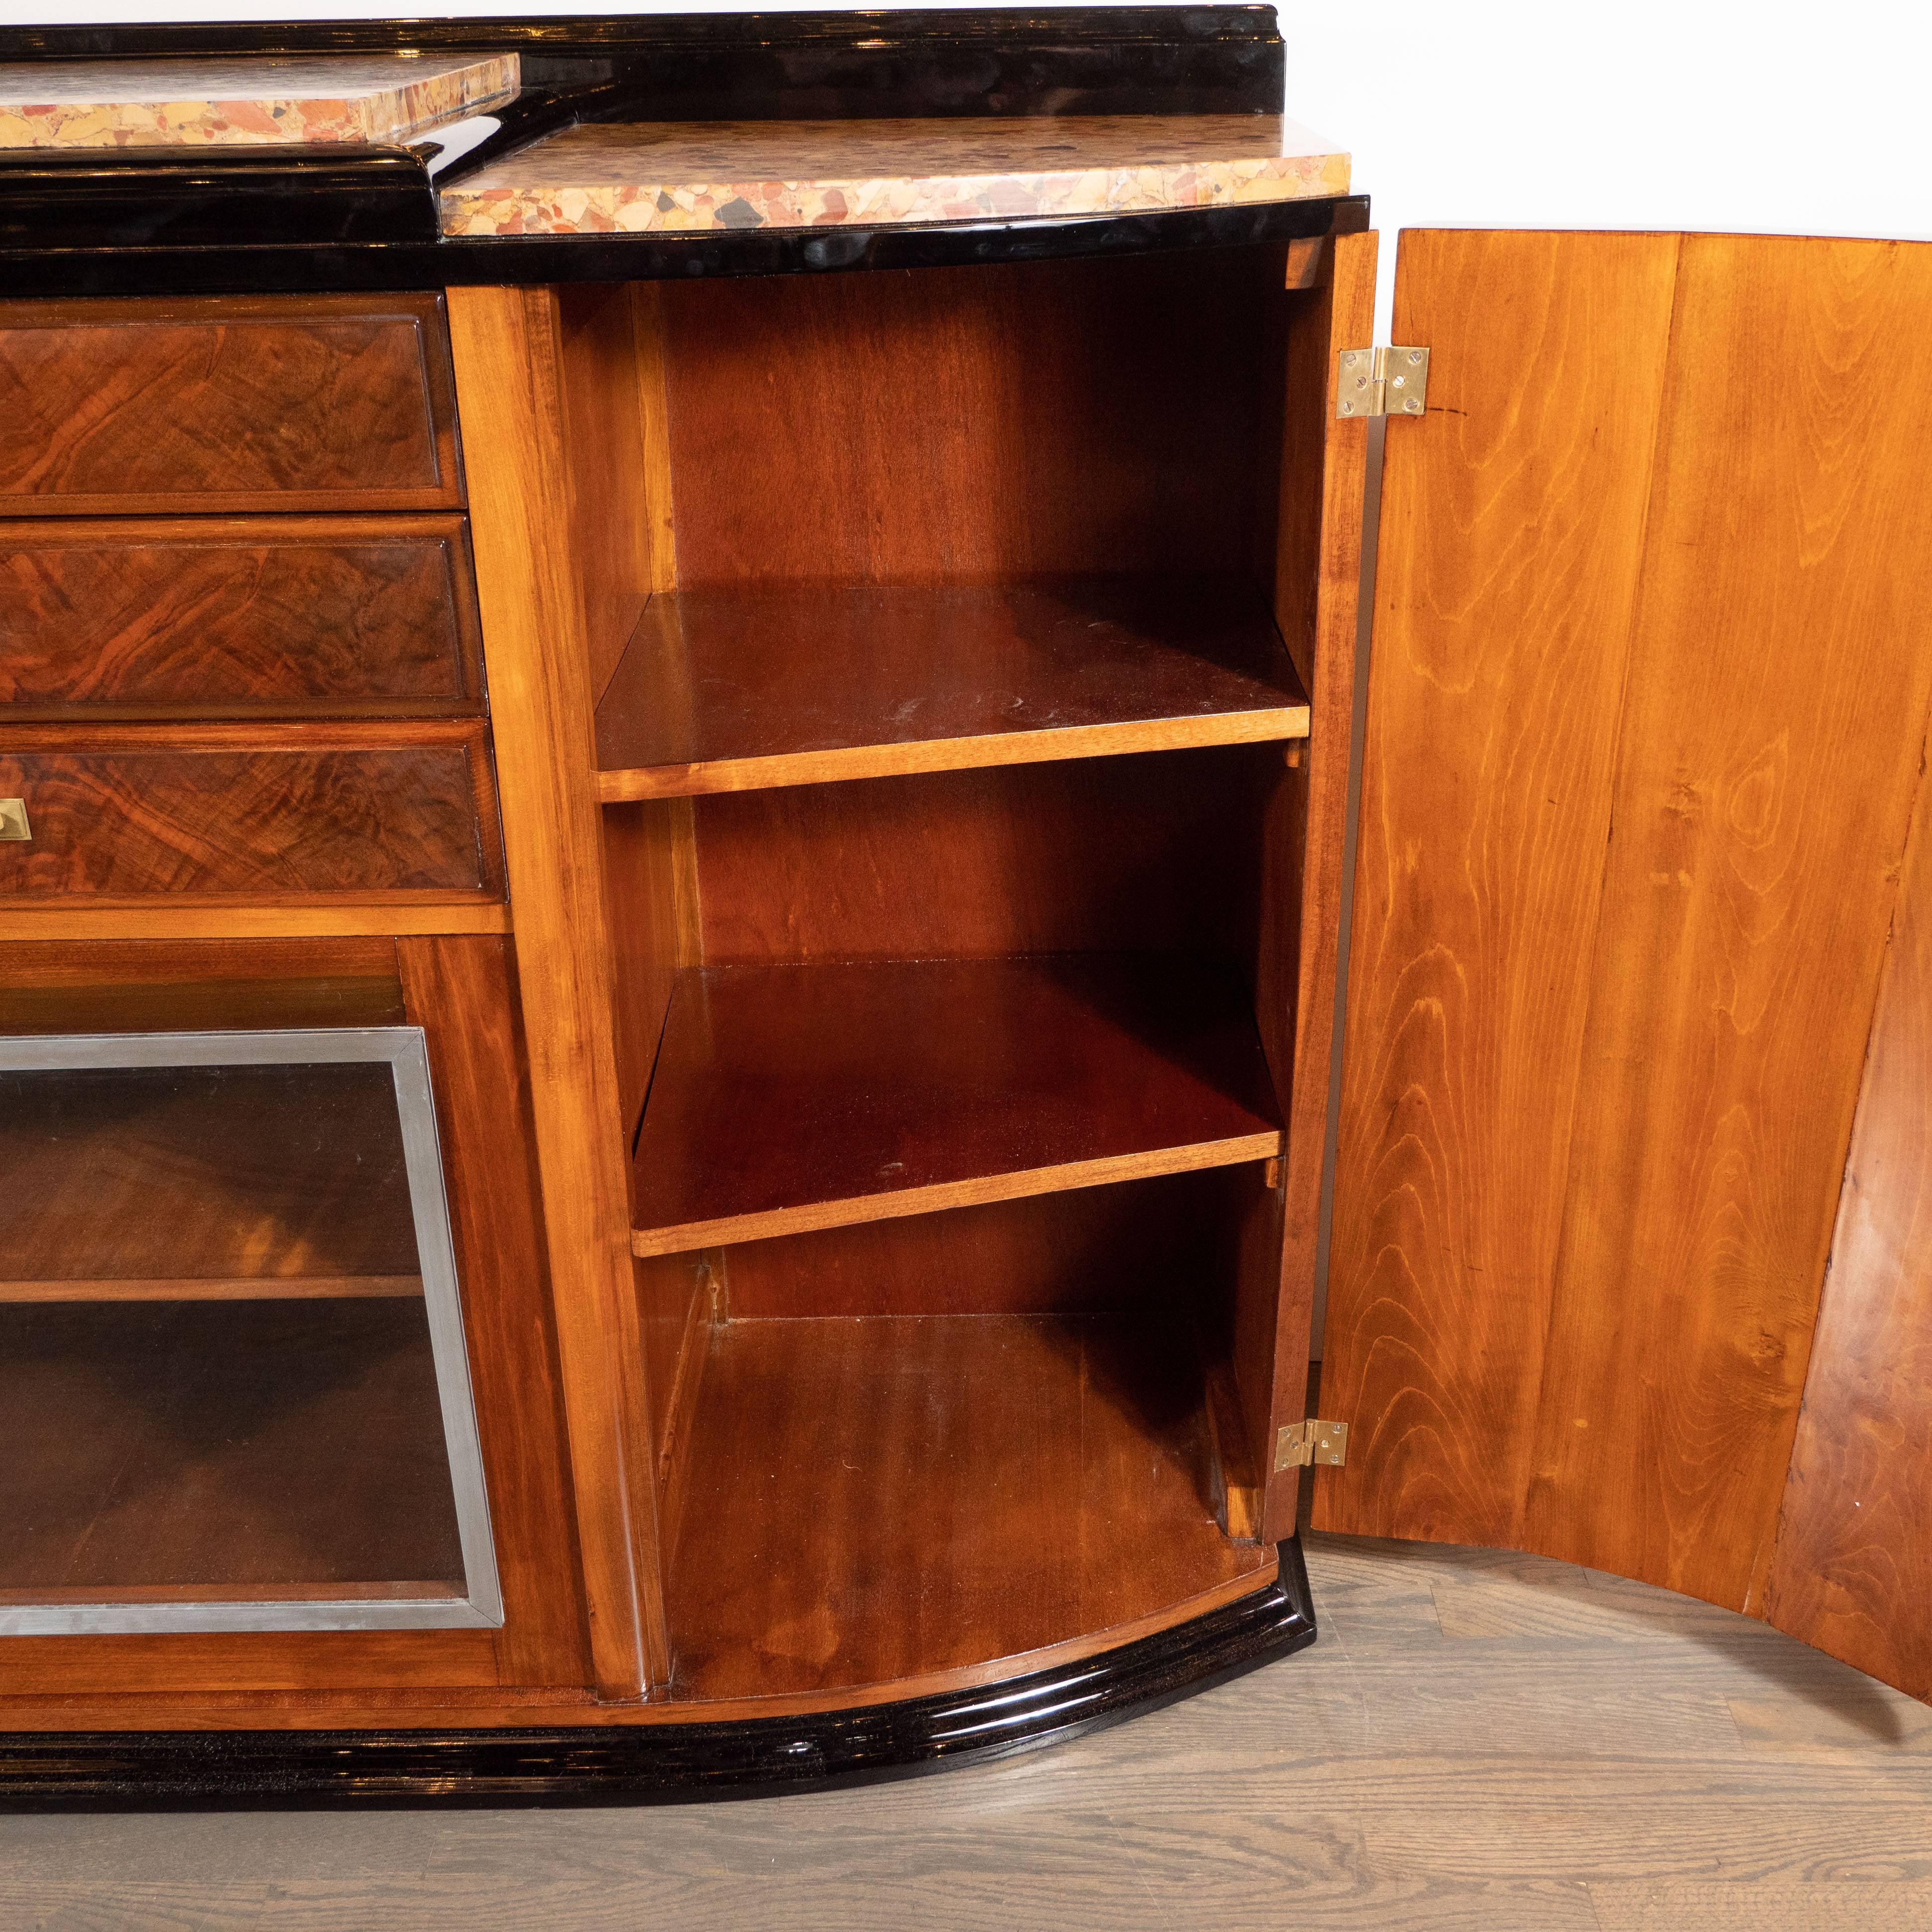 Mid-20th Century Art Deco Sideboard or Cabinet in Burled Walnut, Exotic Marble and Black Lacquer